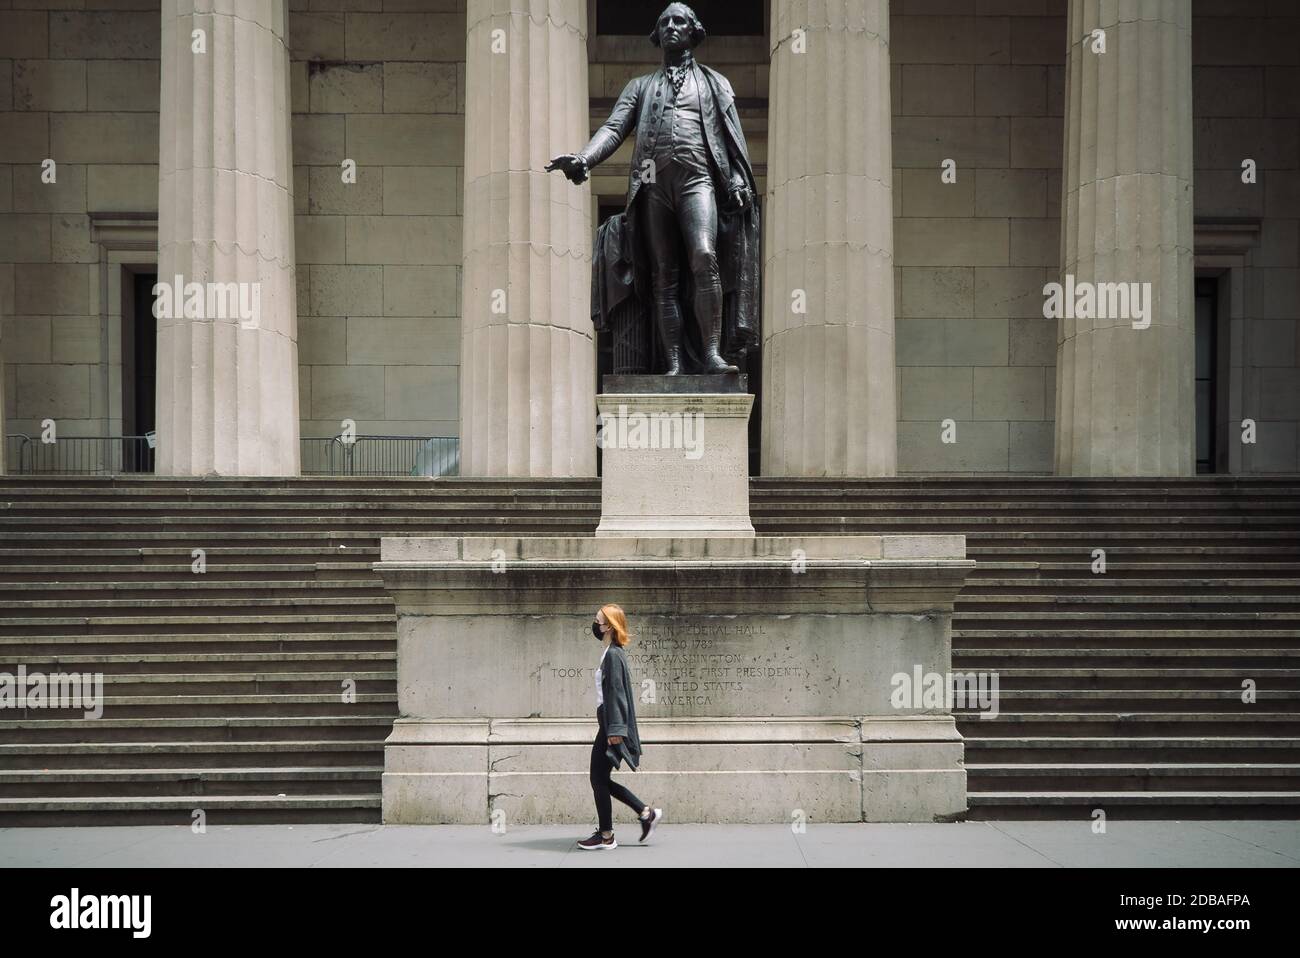 A woman wearing a face mask walks in front of John Quincy Adams Ward's bronze Statue of George Washington at Federal Hall in Wall street Stock Photo